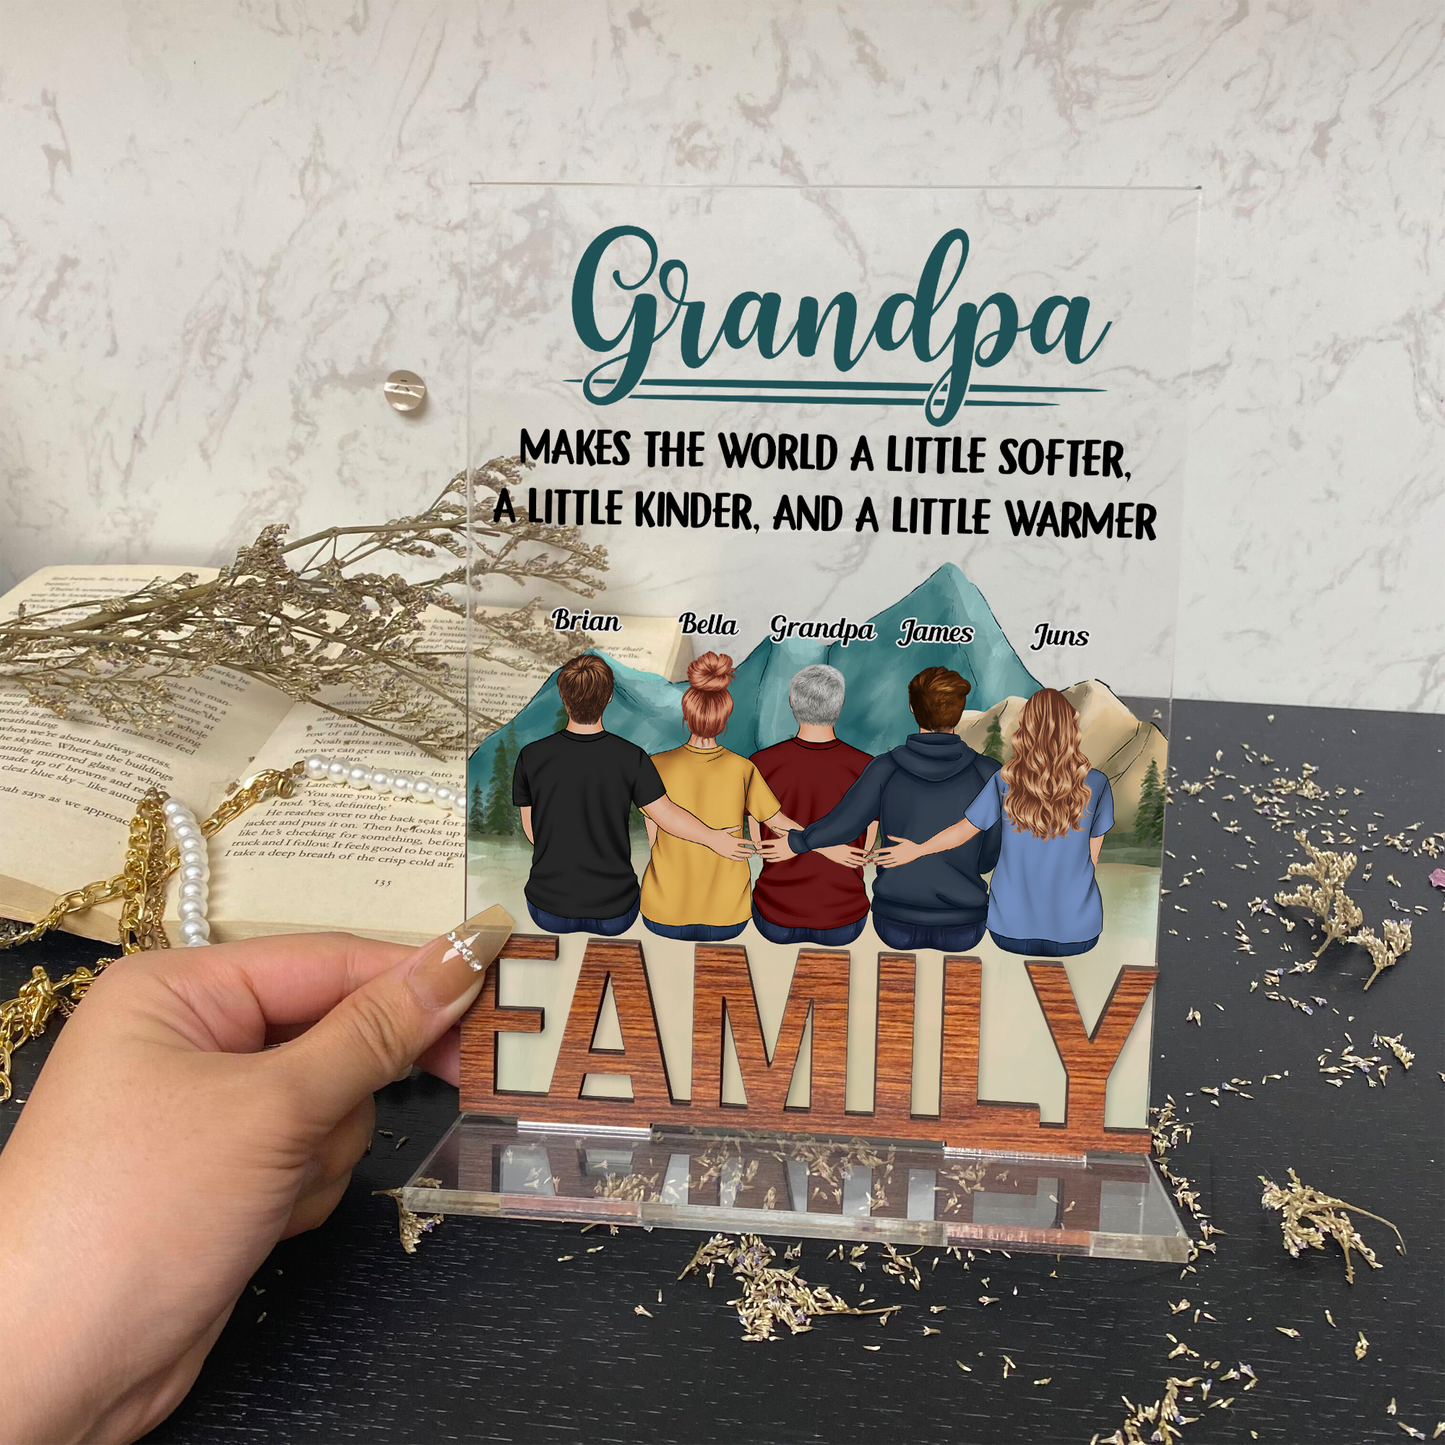 [Only available in the U.S] Grandpa Makes The World Softer, Kinder, Warmer - Personalized Acrylic Plaque With Standing Wood Letters - Father's Day, Birthday Gift For Grandfather, Grandpa - From Grandkids, Grandchildren